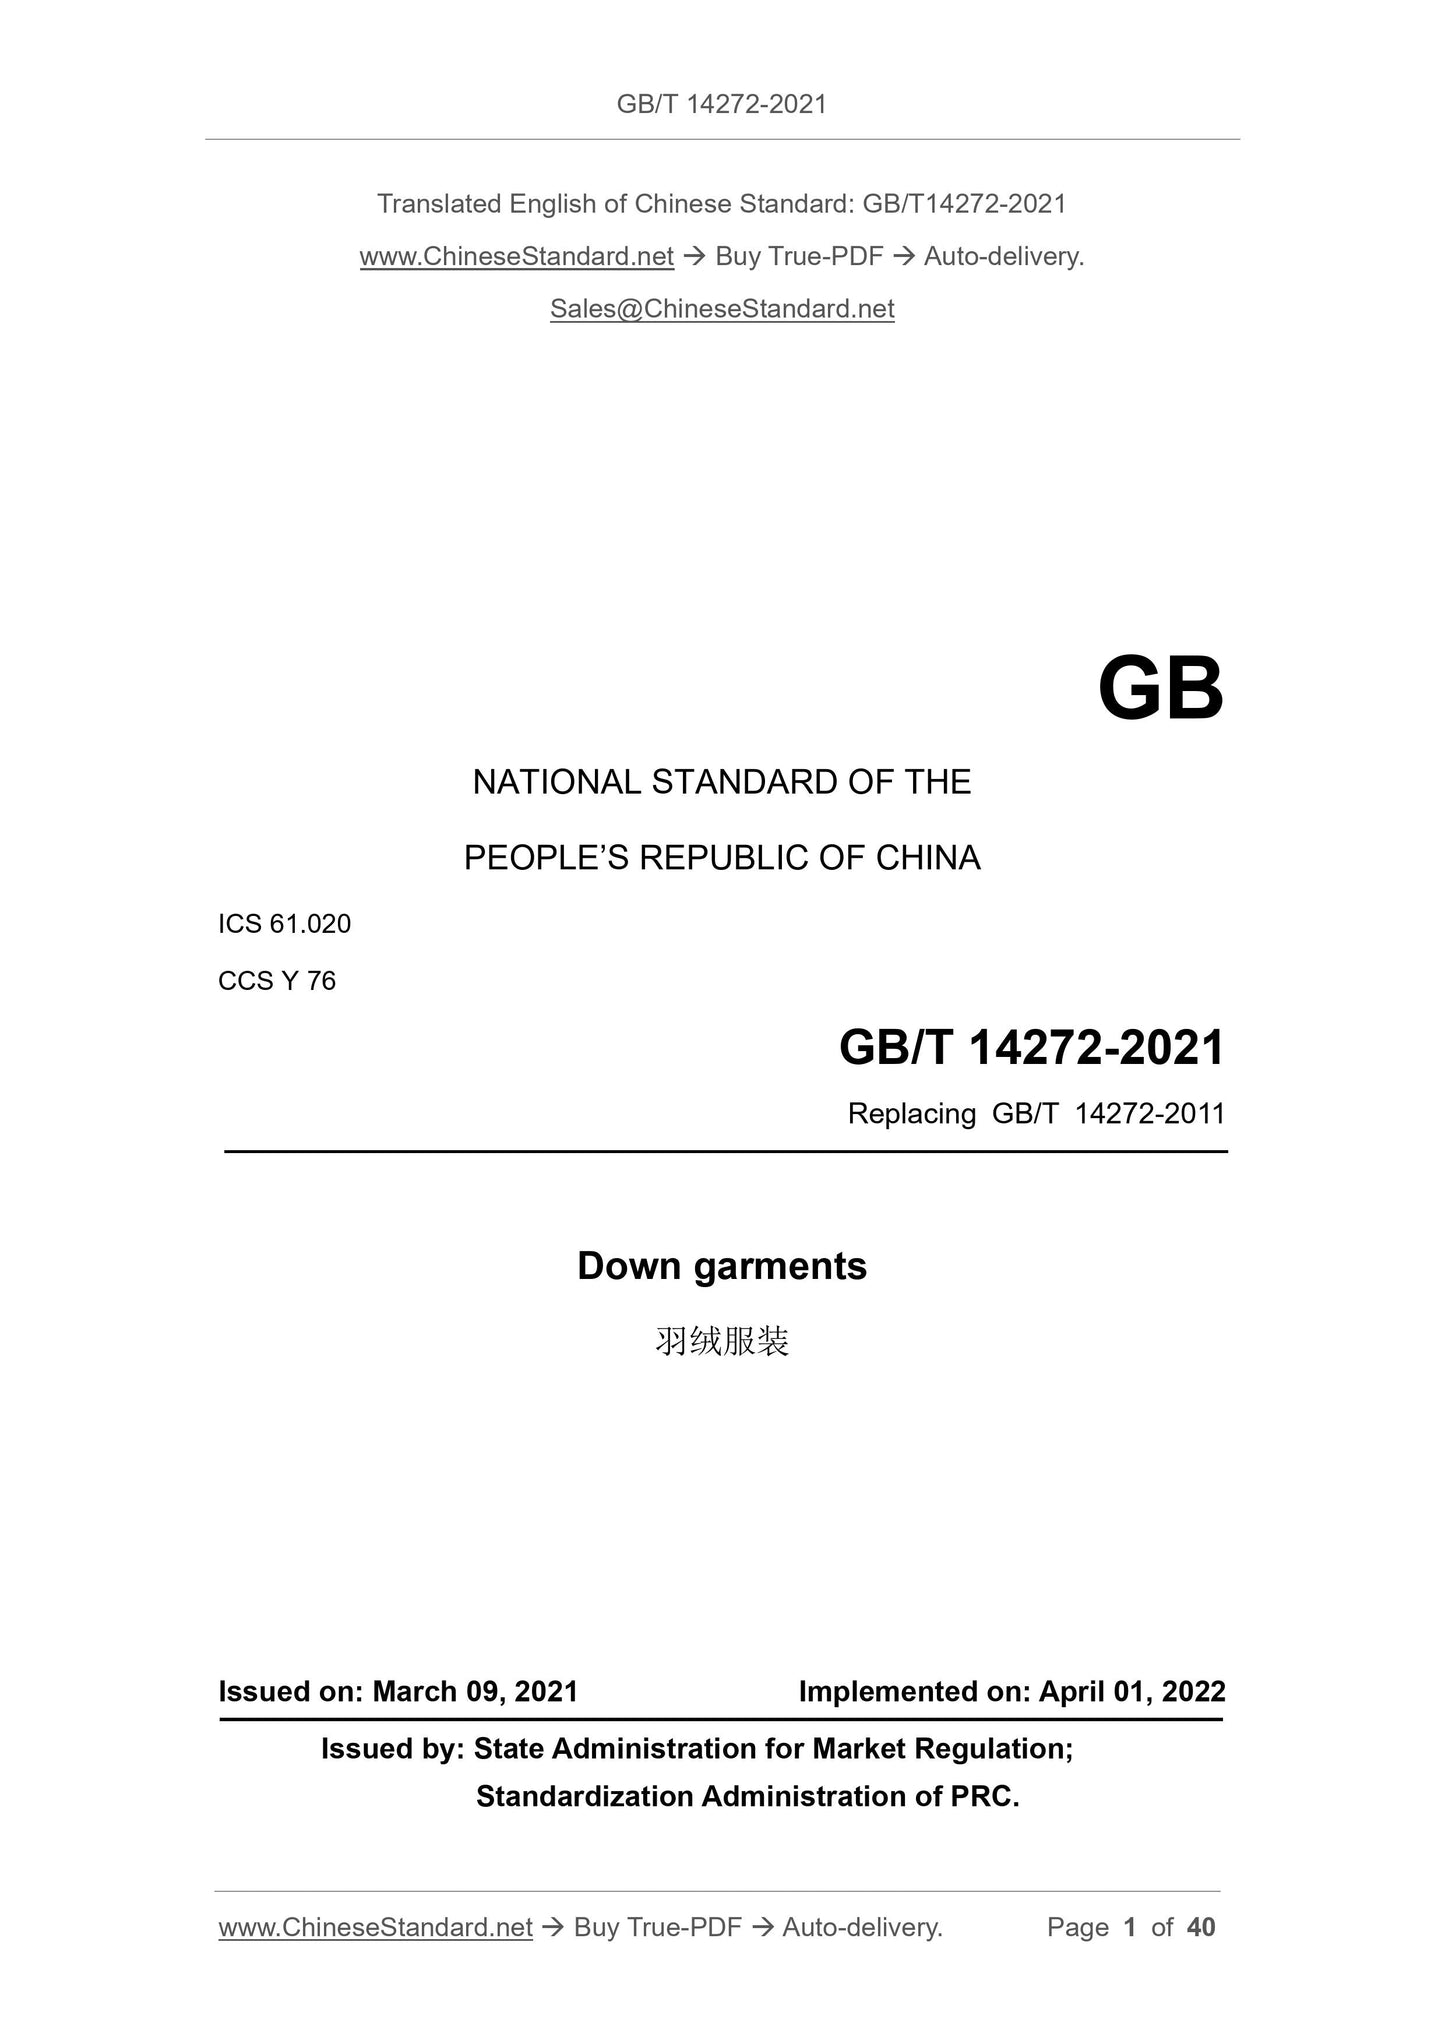 GB/T 14272-2021 Page 1